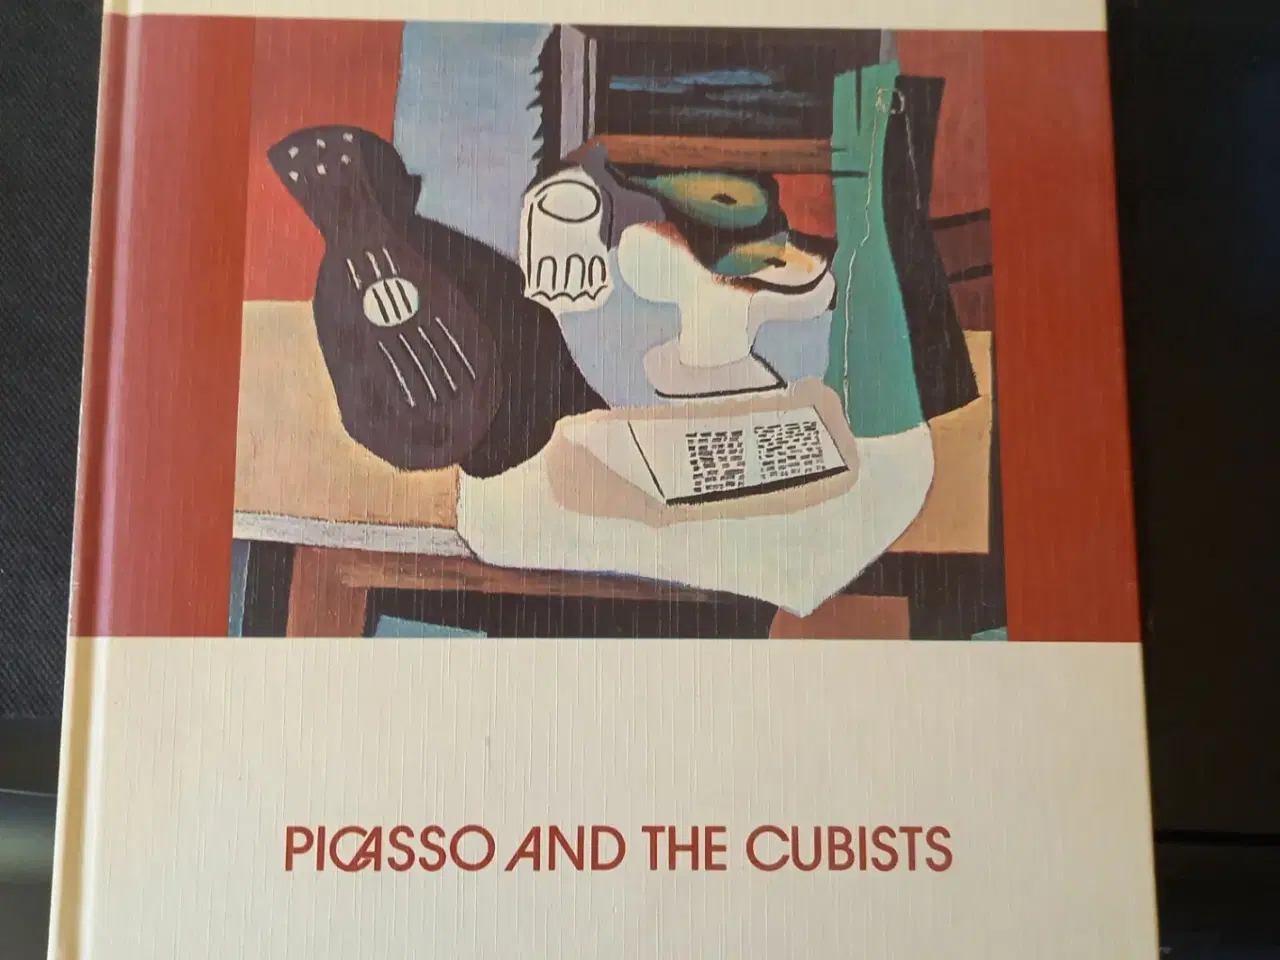 Billede 1 - Picasso and the cubists